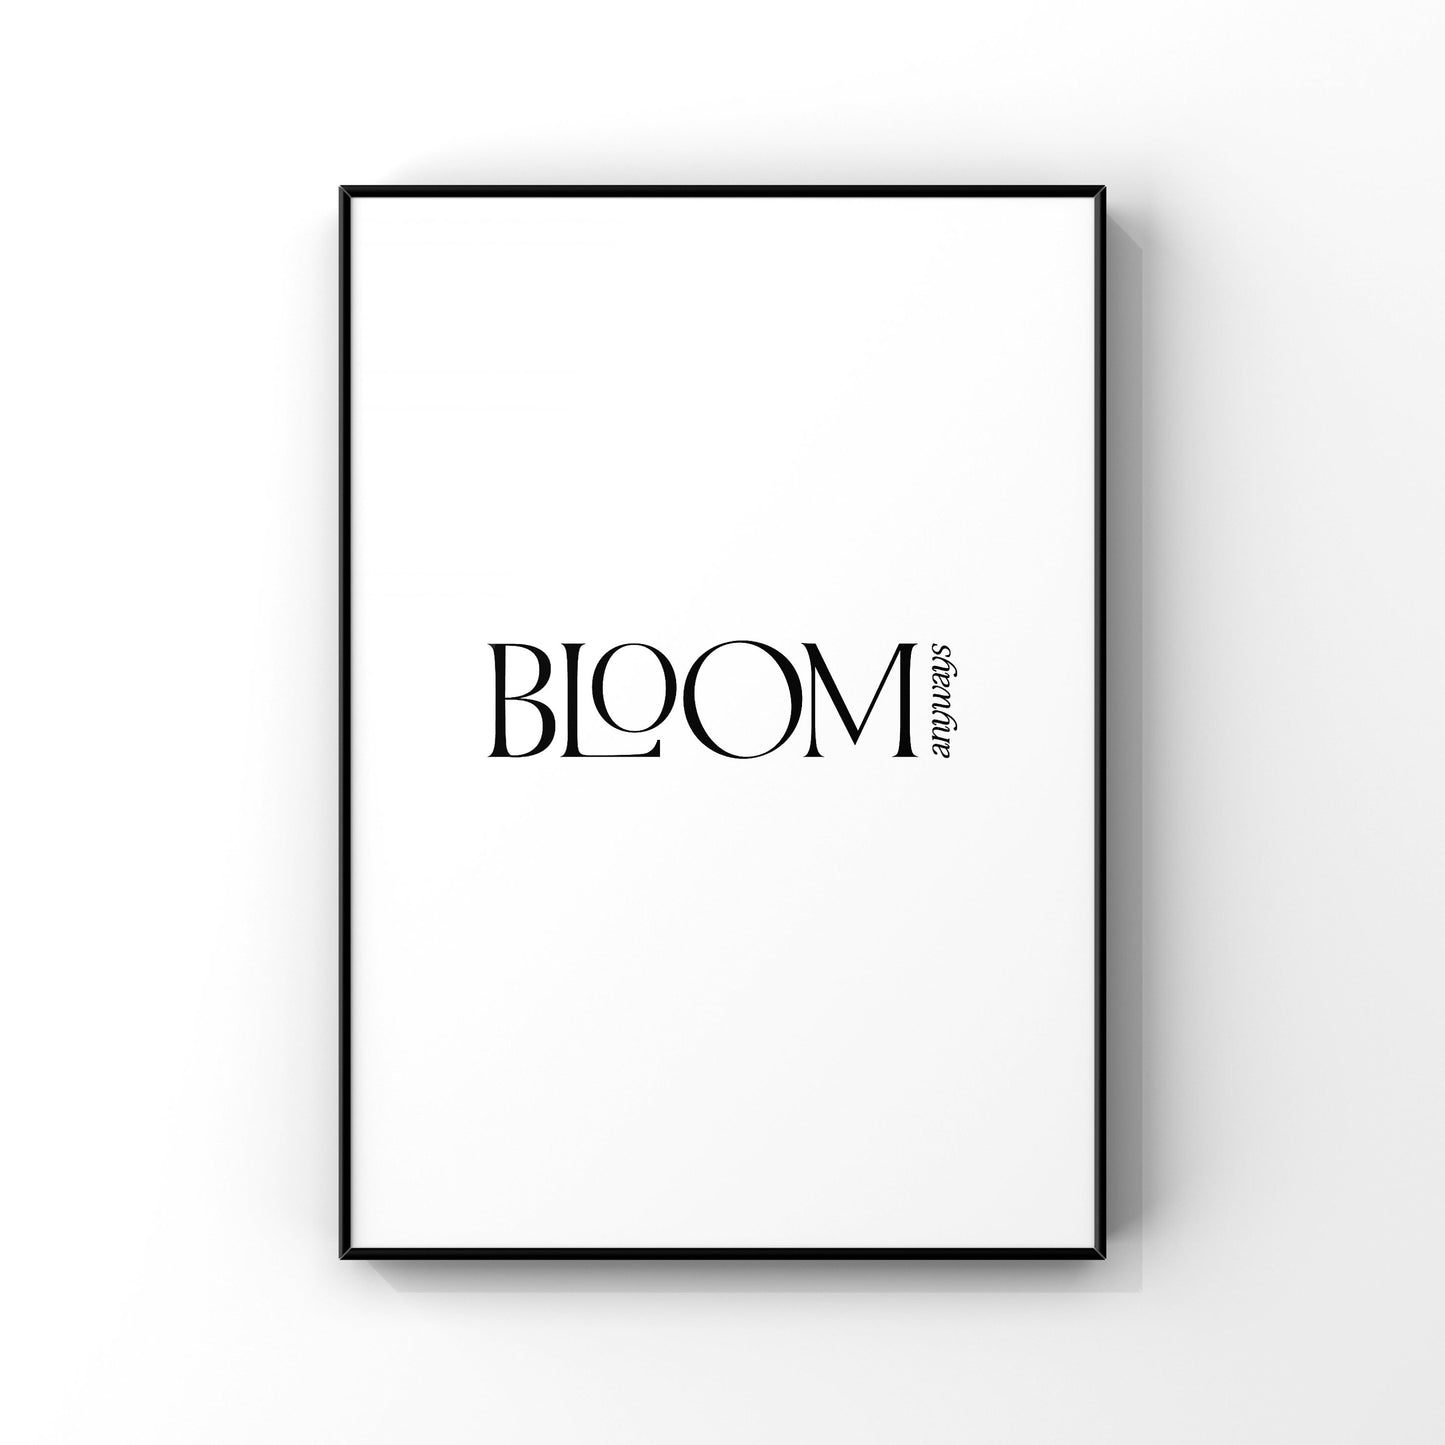 Bloom anyways art print, Flower quote, Floral Wall Decor, Flower Wall Art, Inspirational Quote